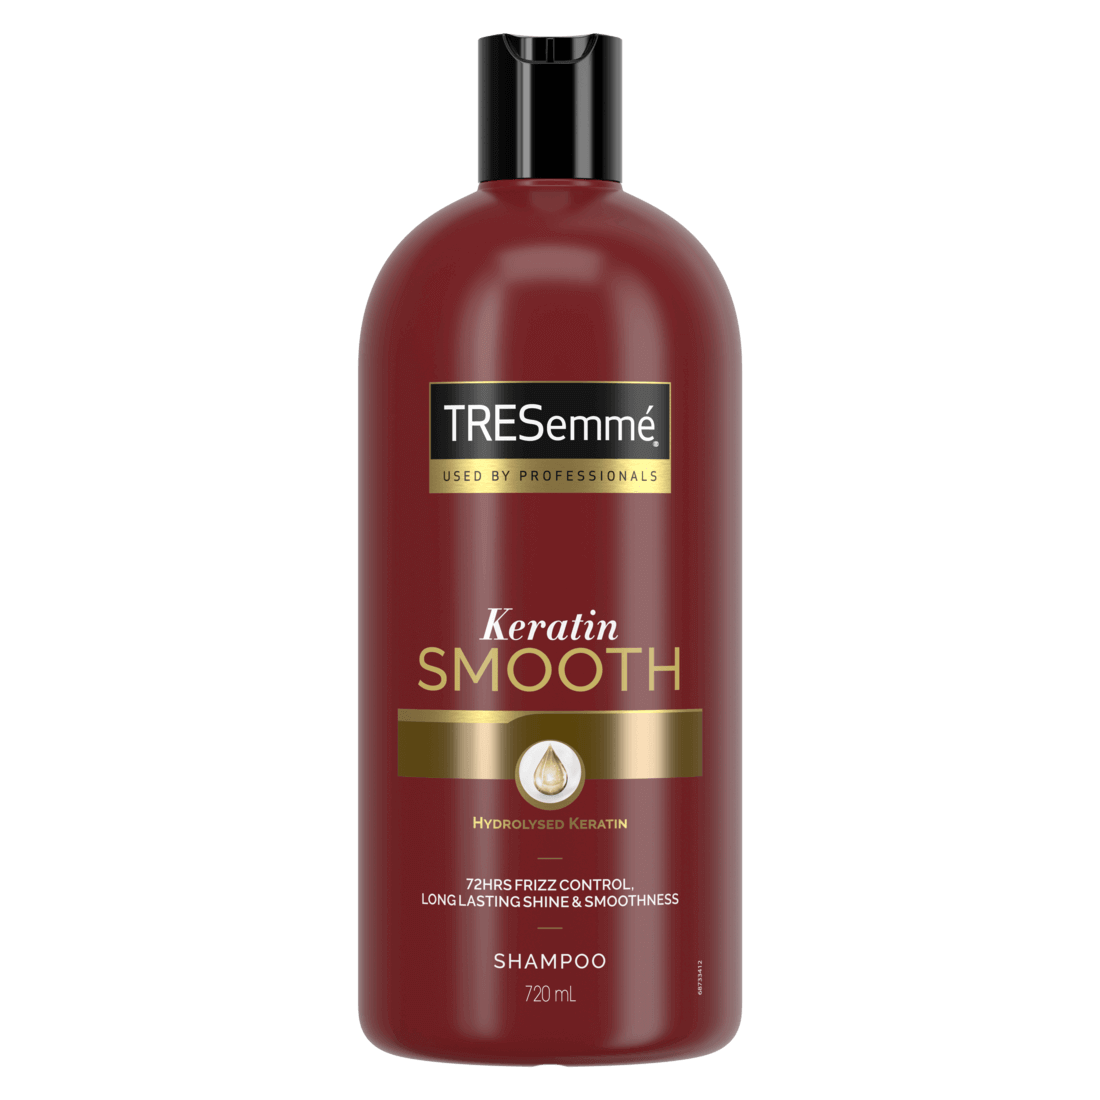 Keratin Smooth Shampoo 720 ml front of pack